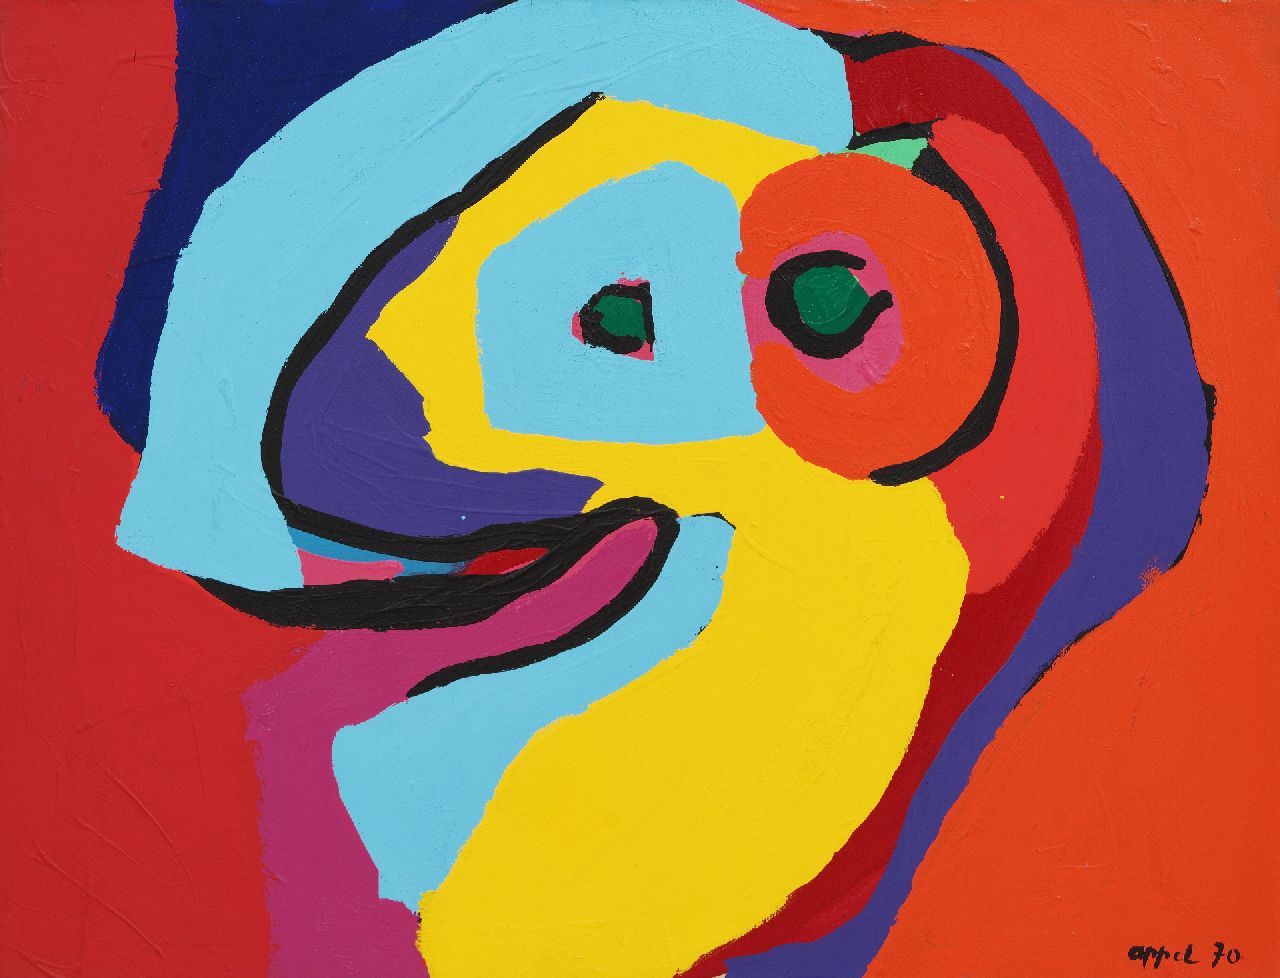 Appel C.K.  | Christiaan 'Karel' Appel | Paintings offered for sale | Face, acrylic on paper on canvas 51.5 x 67.5 cm, signed l.r. and dated 1970  reserved